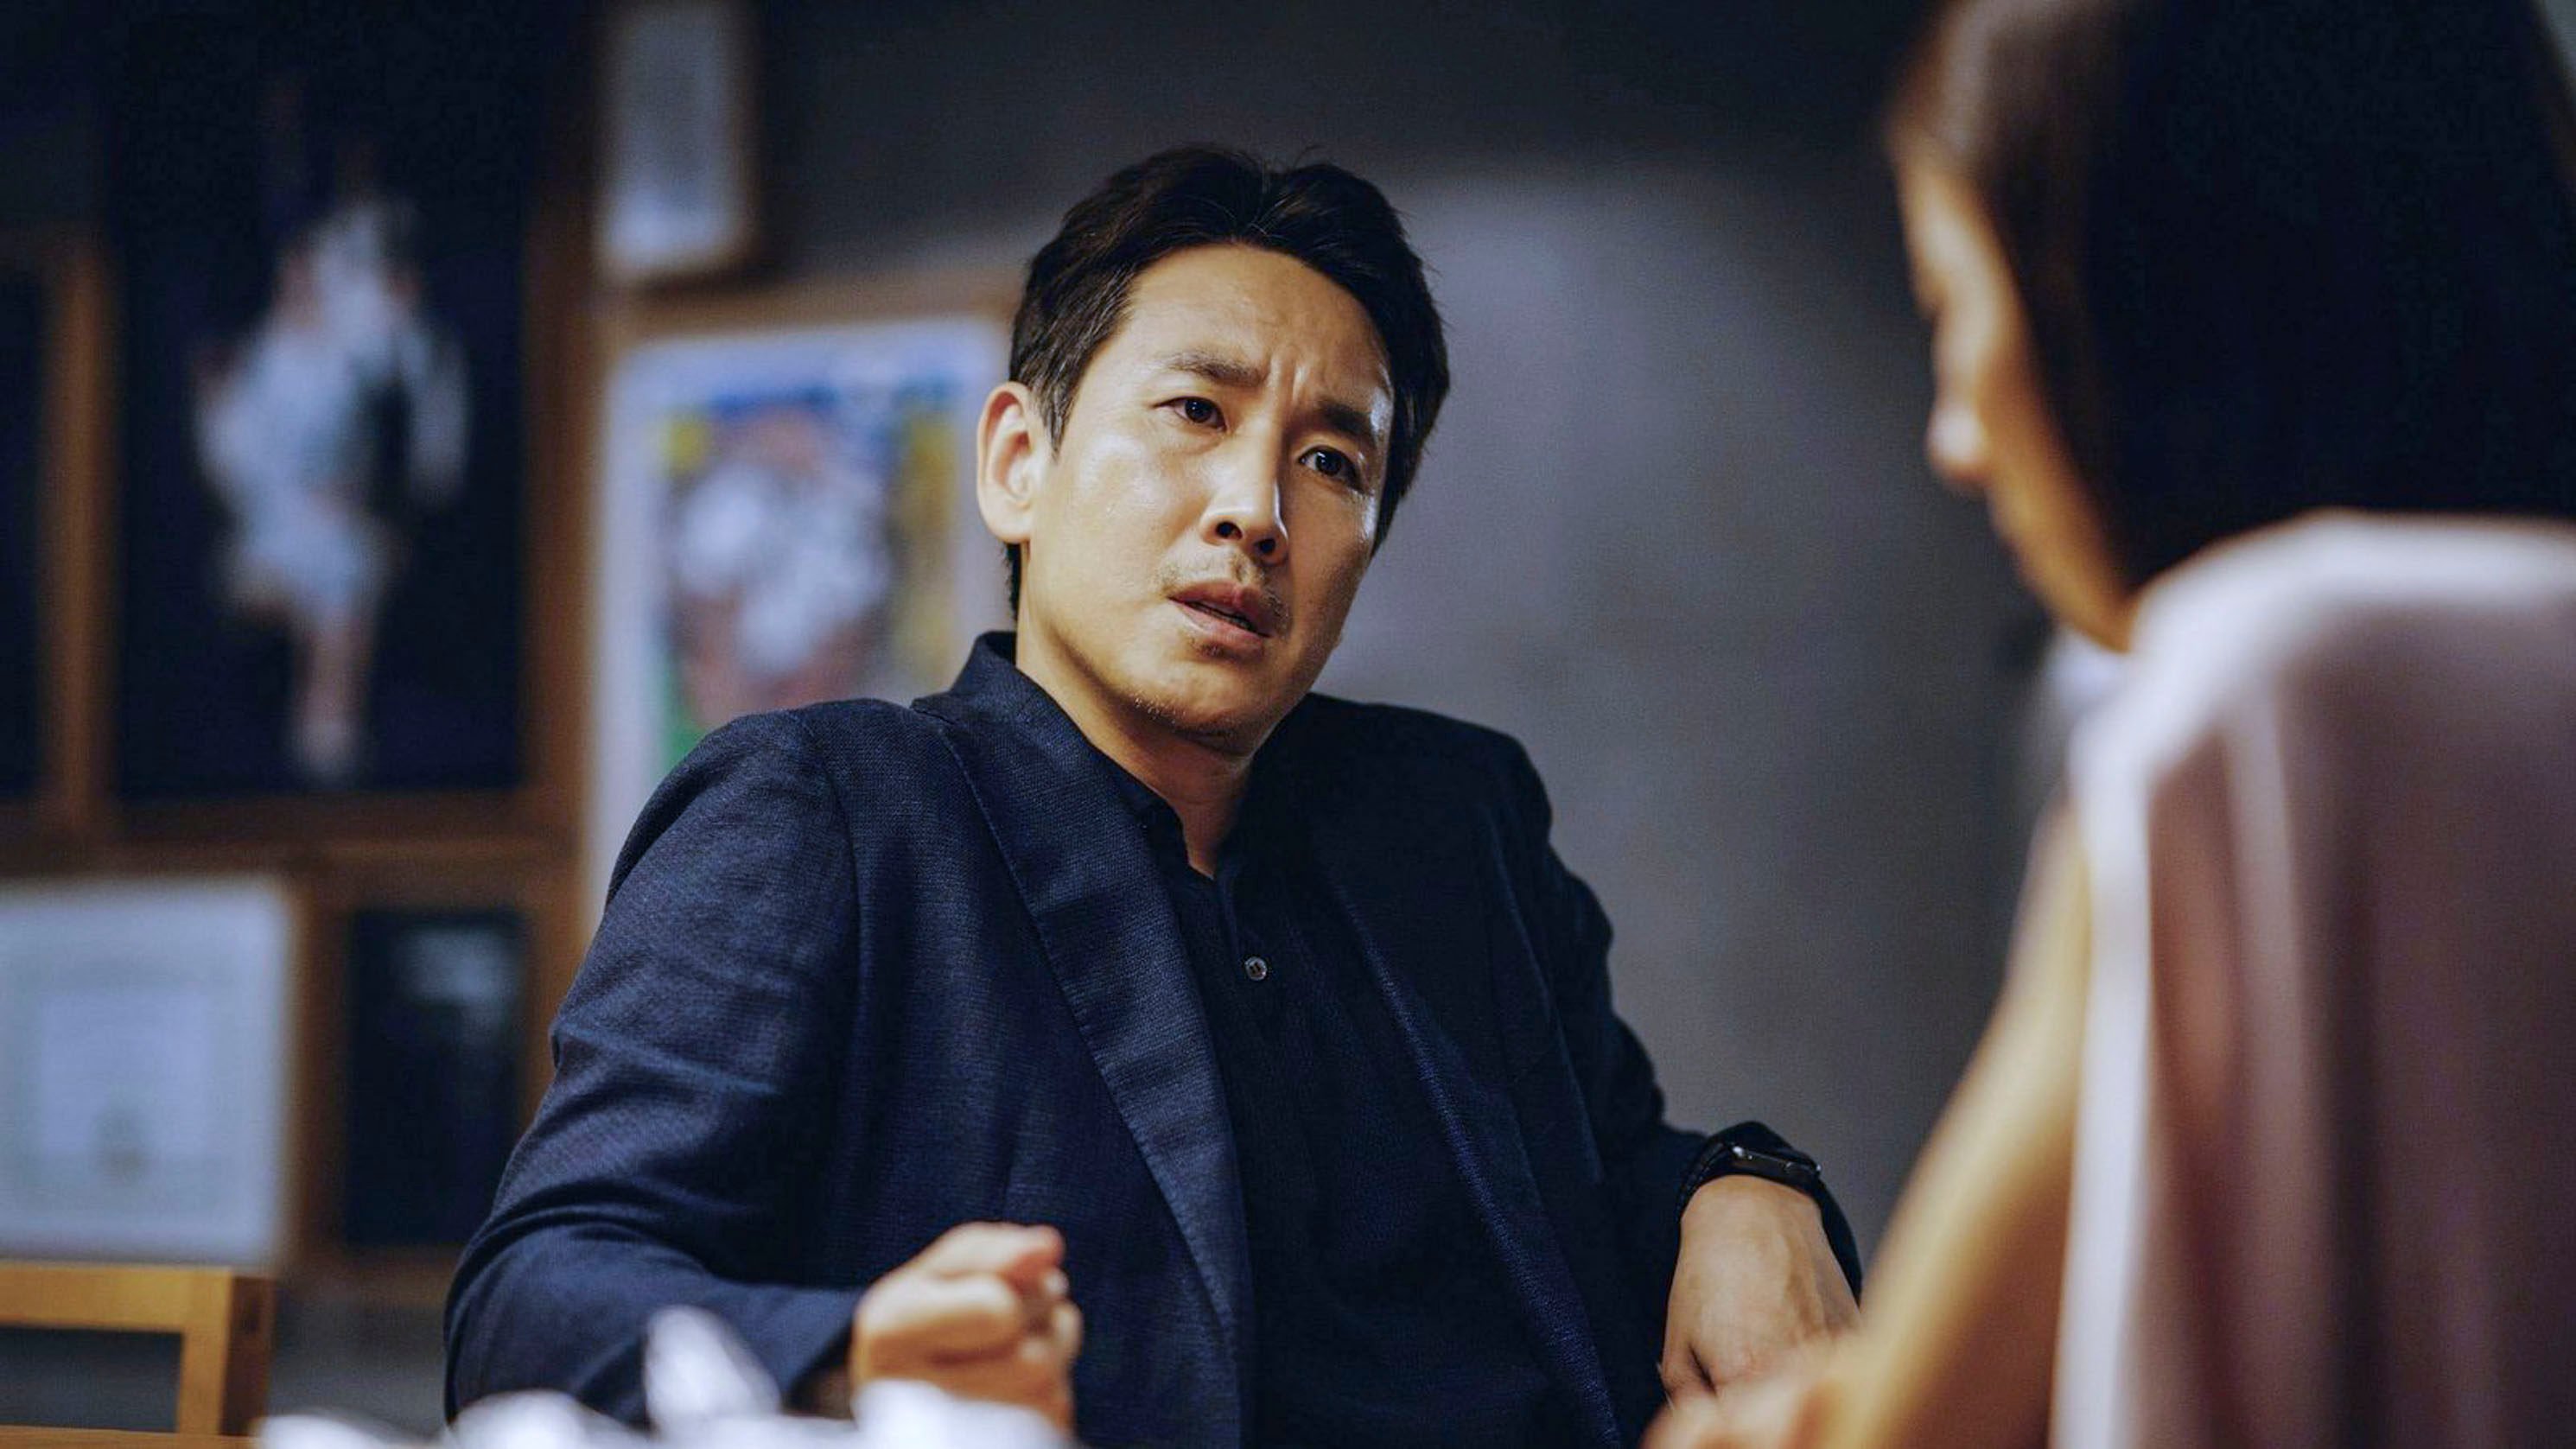 Korean actor Lee Sun-kyun in a still from Oscar best picture winner “Parasite”. With the actor’s death in an apparent suicide announced, we recall some of his most memorable screen roles. Photo: CJ Entertainment